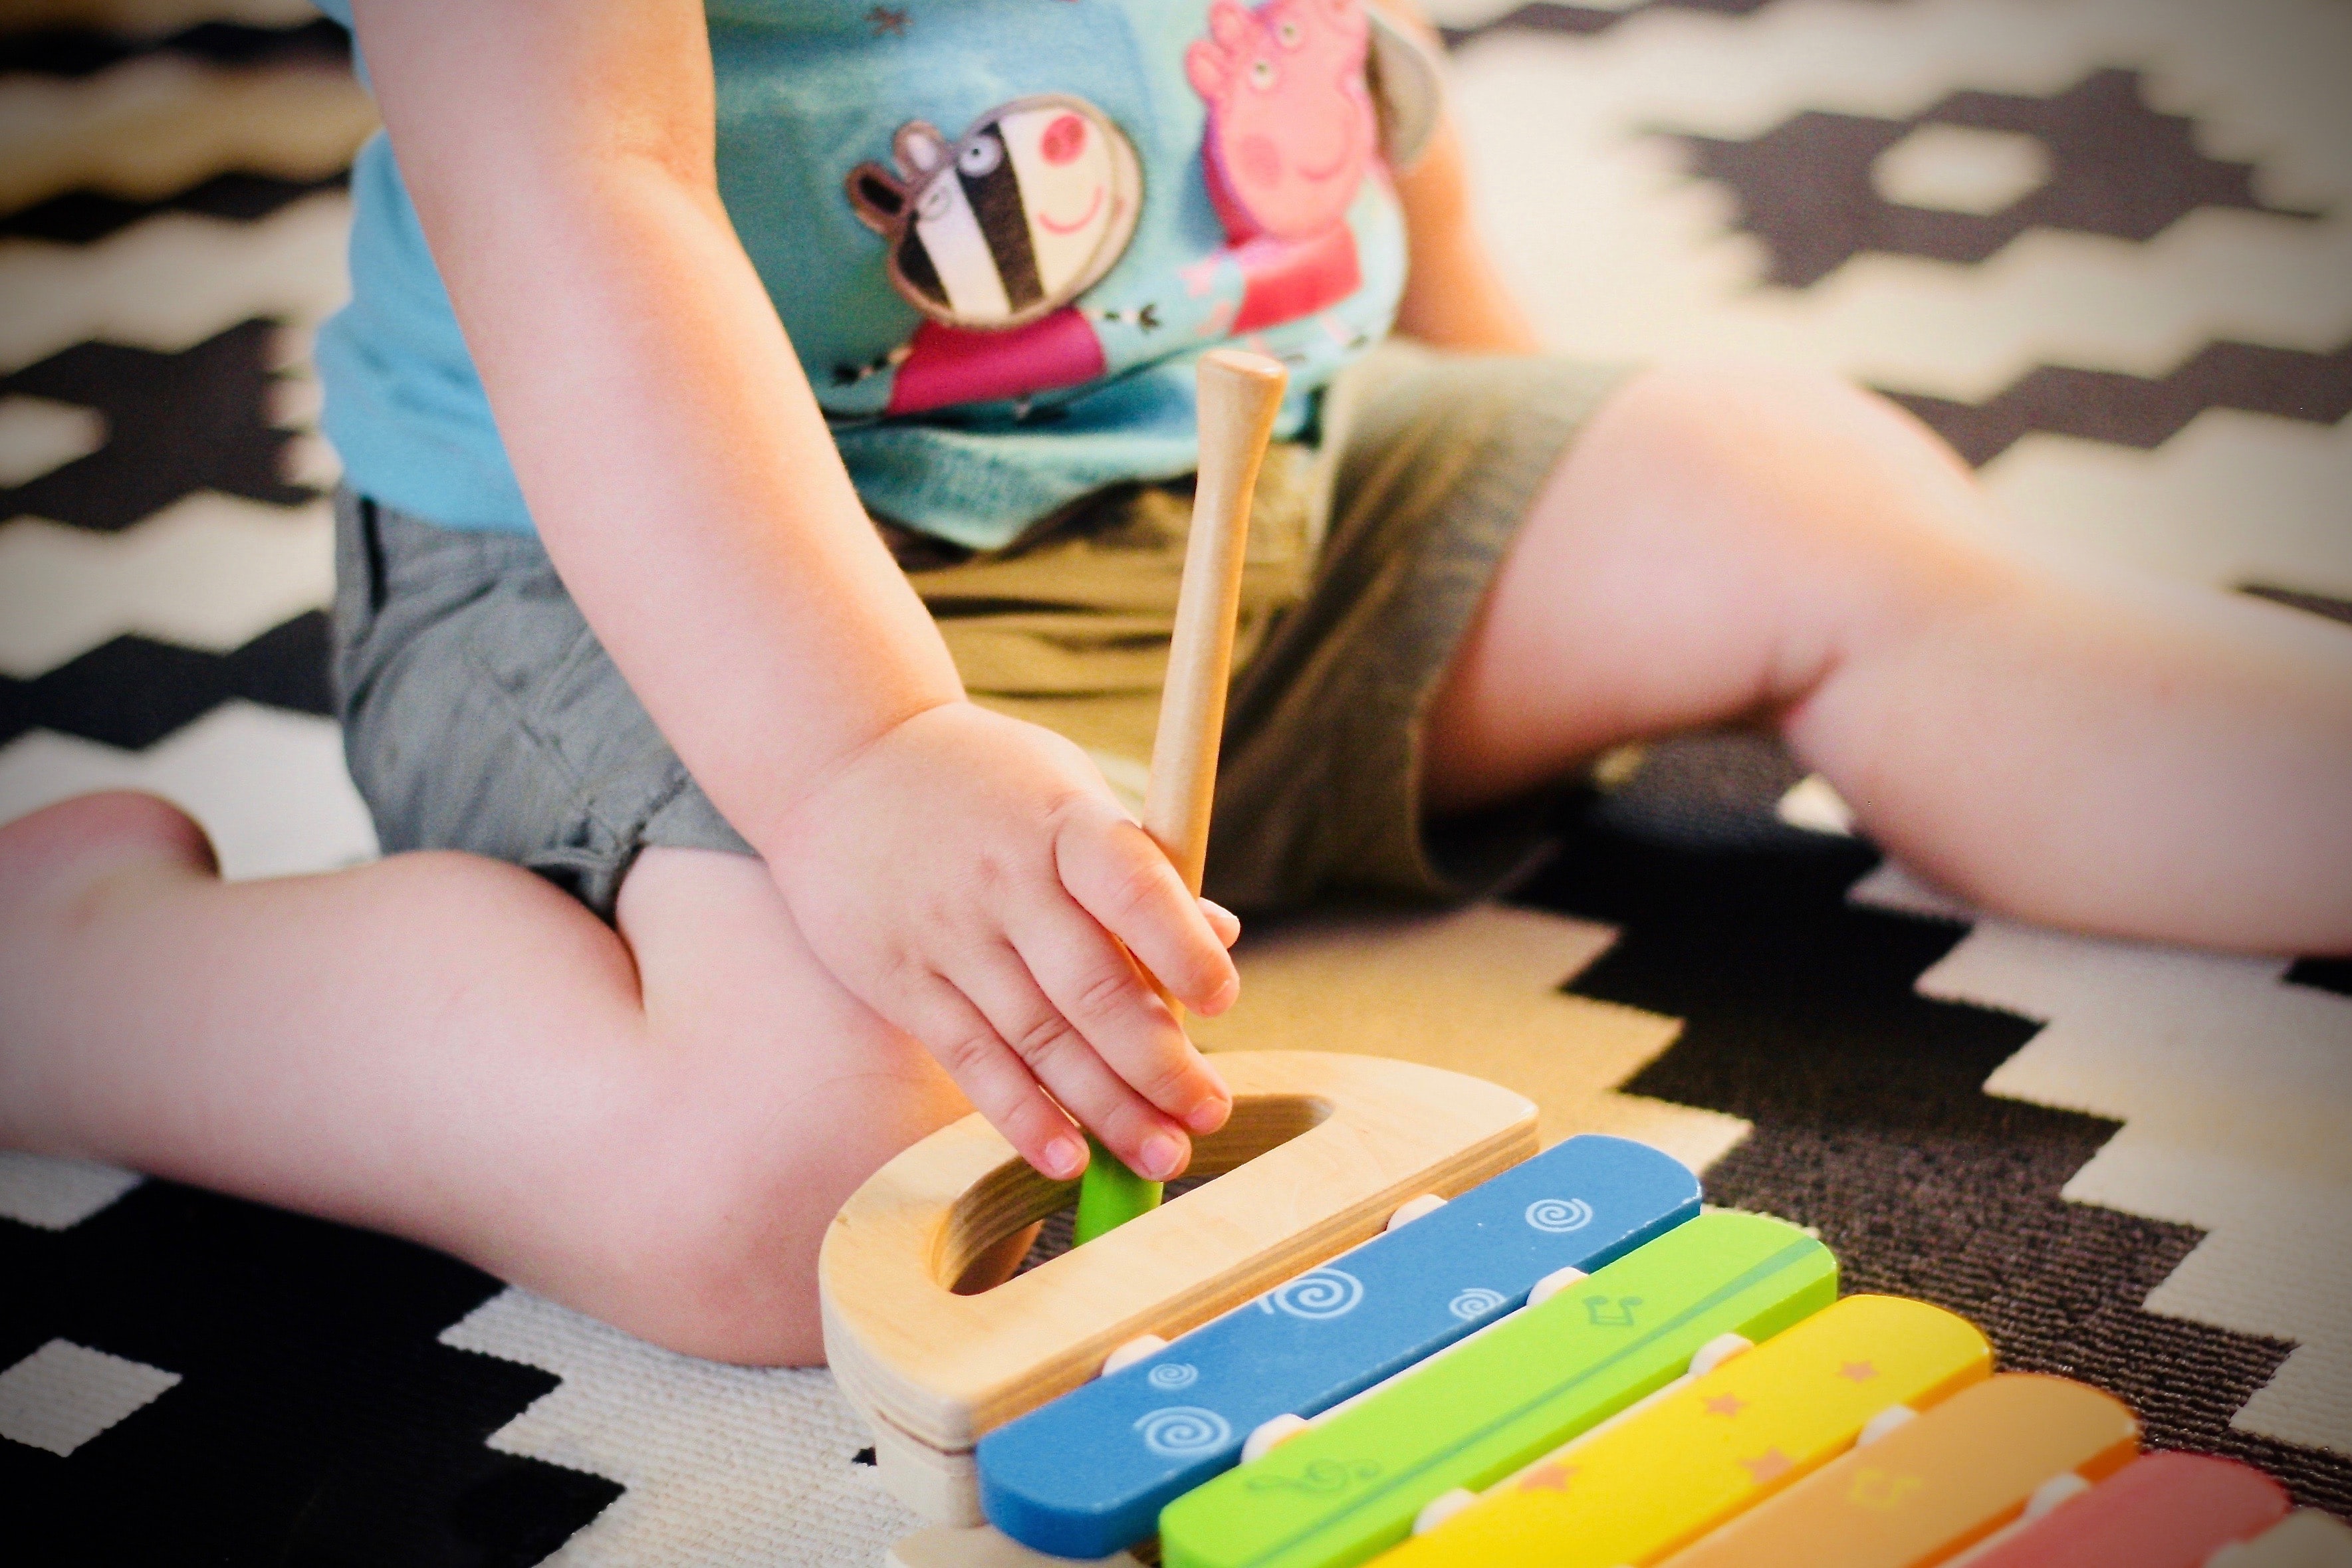 At the age of 15 months, the child is ready to imitate the activities of adults. The Montessori approach for this period highlights that toys are not as interesting to children as mastering everyday activities is - the domestic activities.